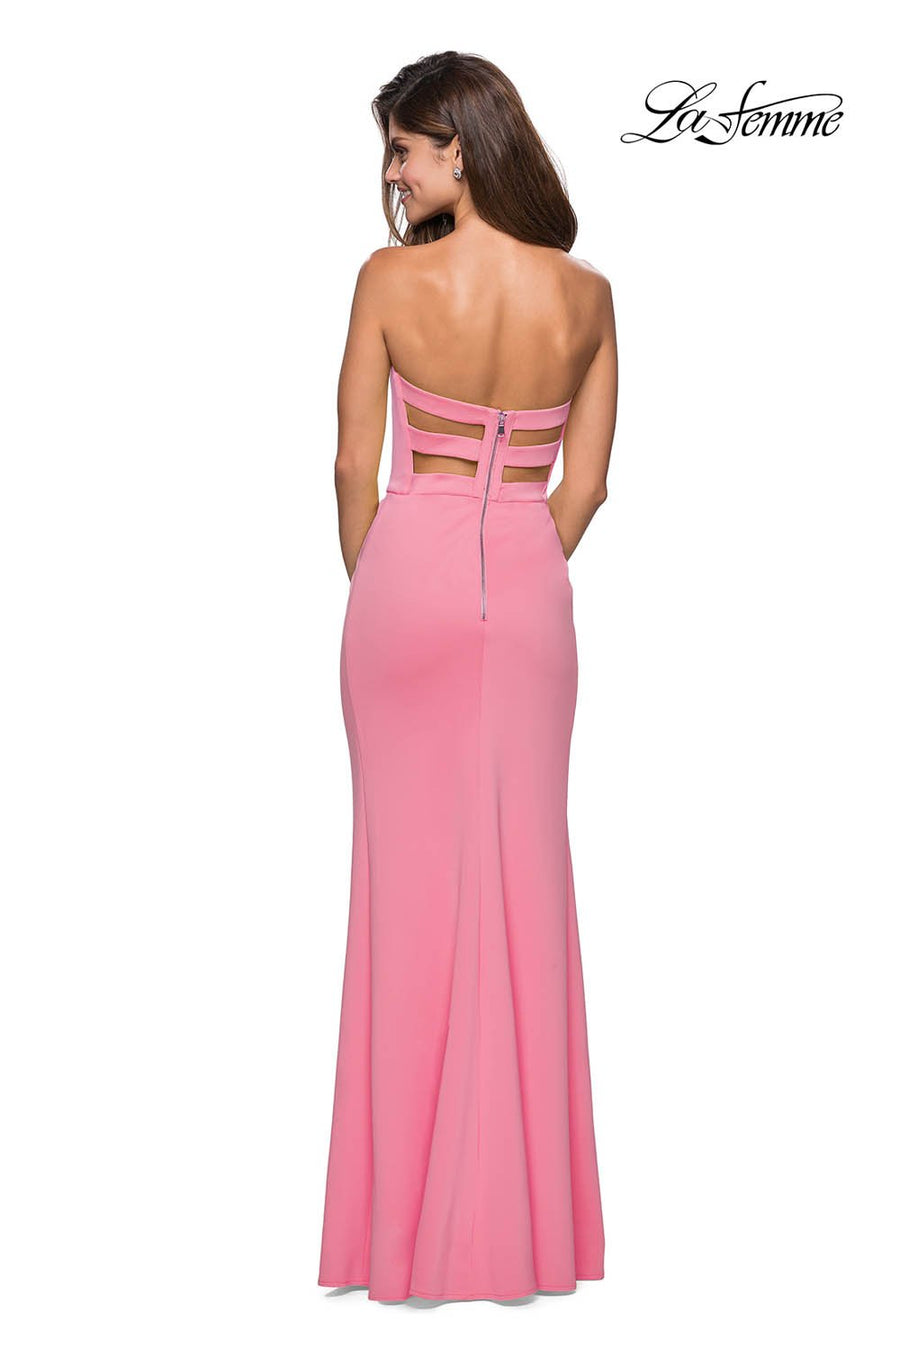 La Femme 27335 prom dress images.  La Femme 27335 is available in these colors: Yellow.